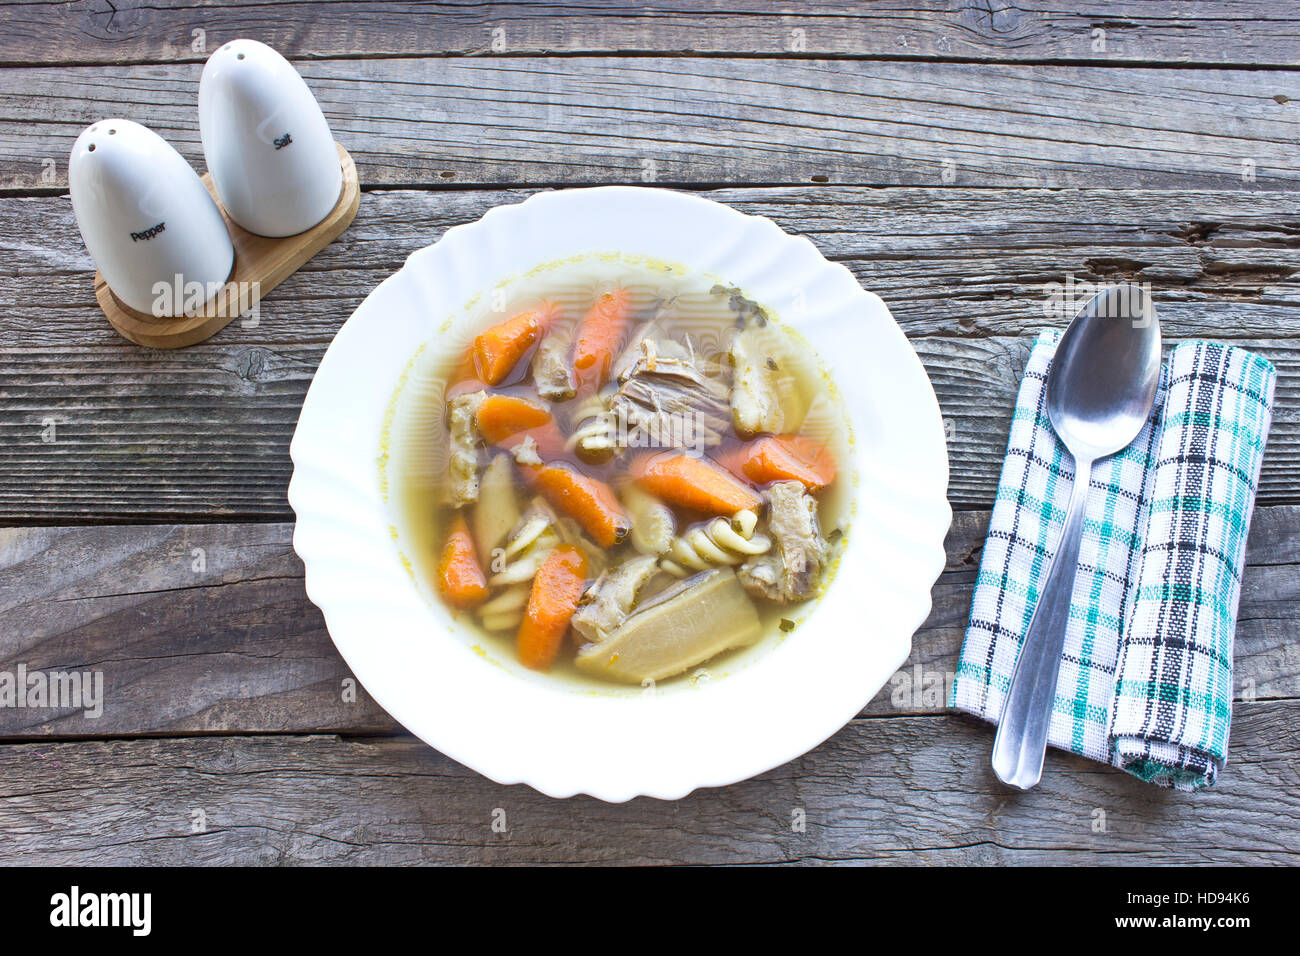 Beef and vegetable broth soup on wooden table Stock Photo